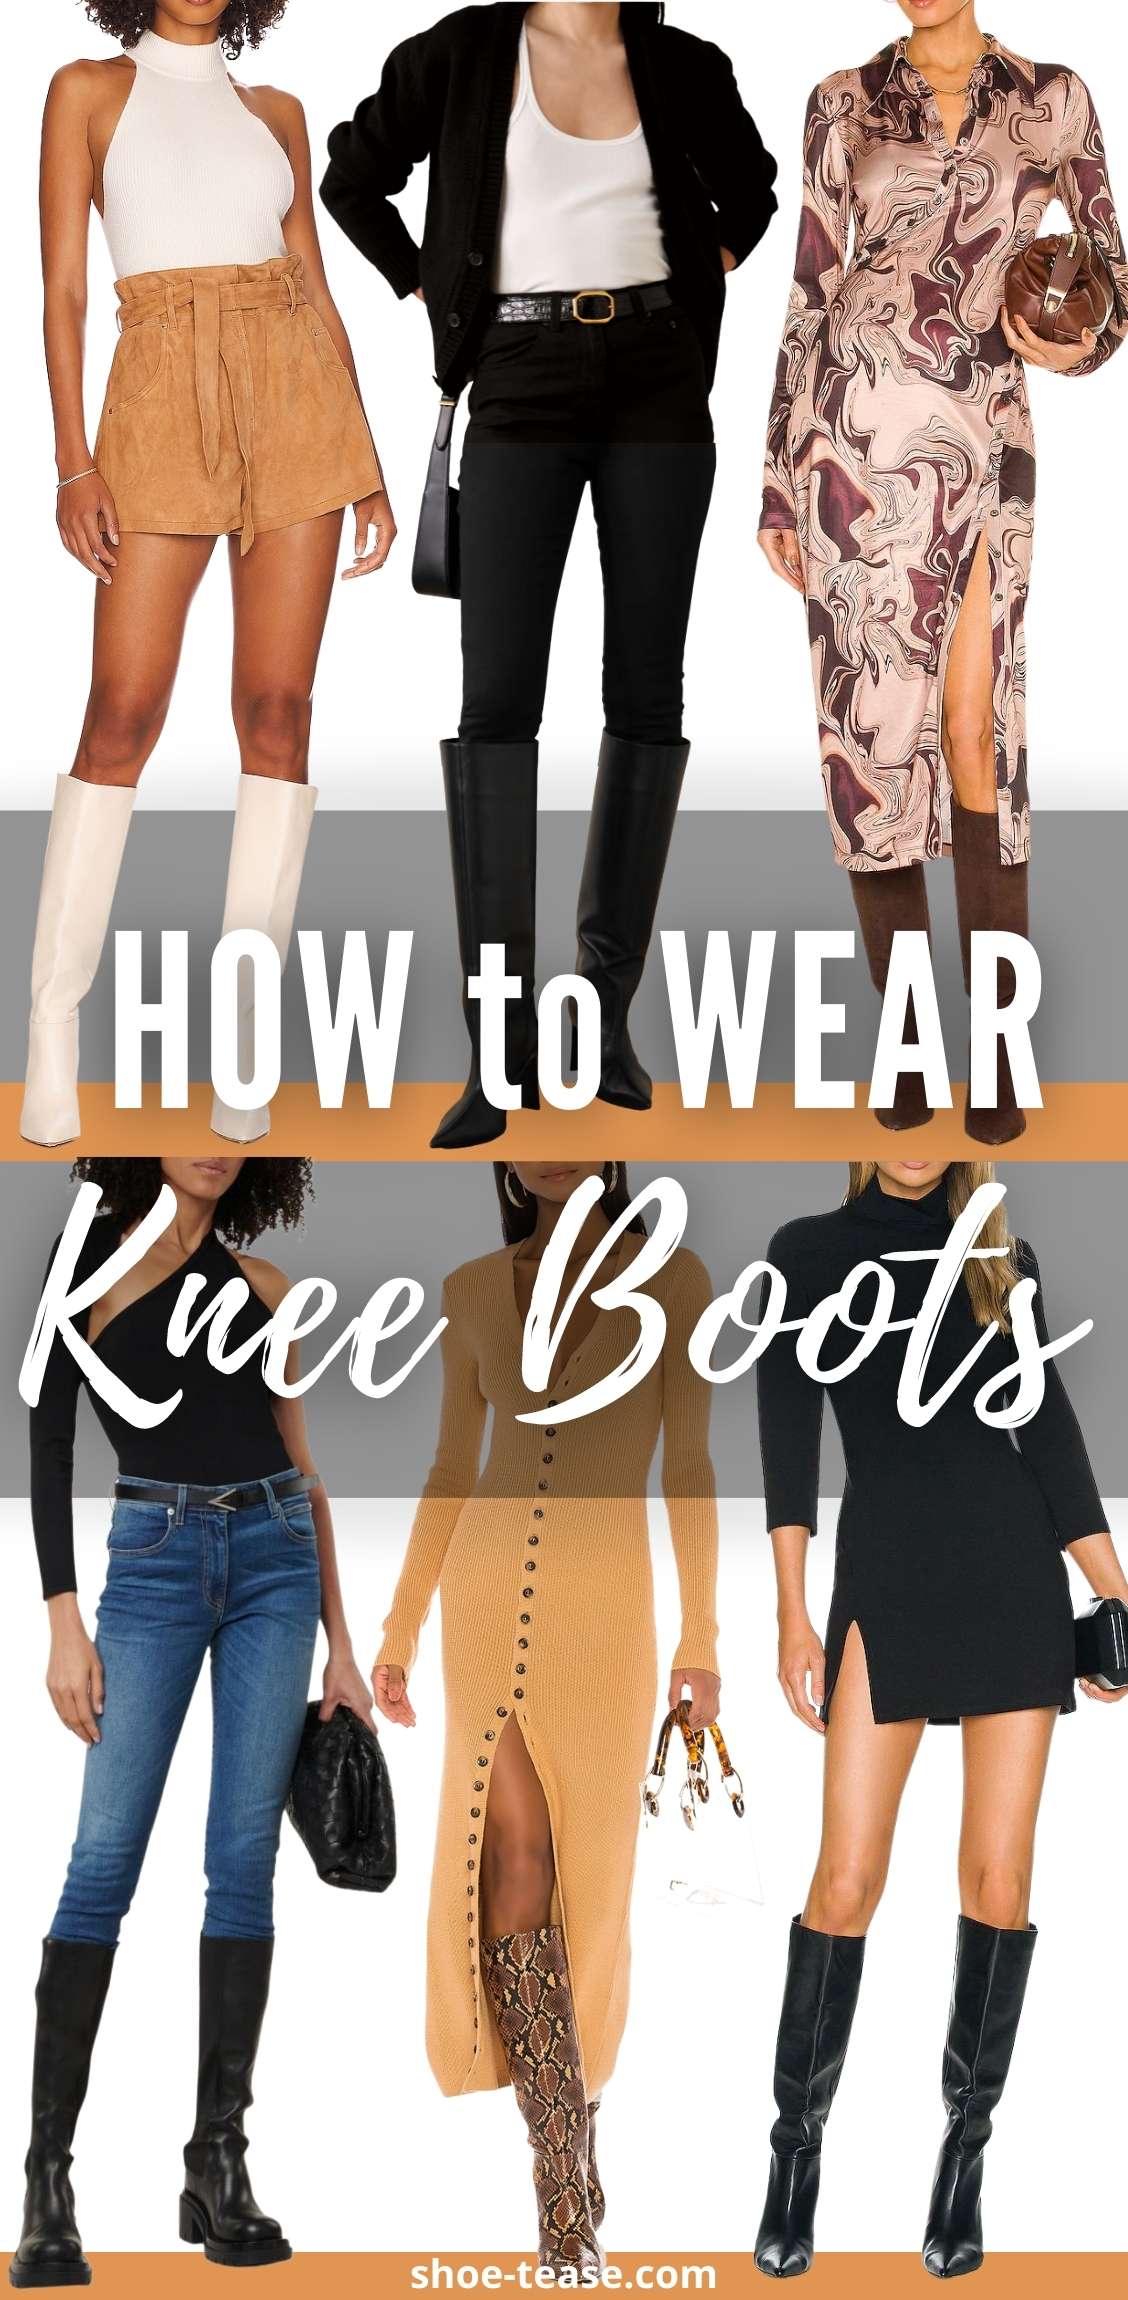 7 Super-Stylish Ways to Wear Your Knee-High Boots for Work and Weekend